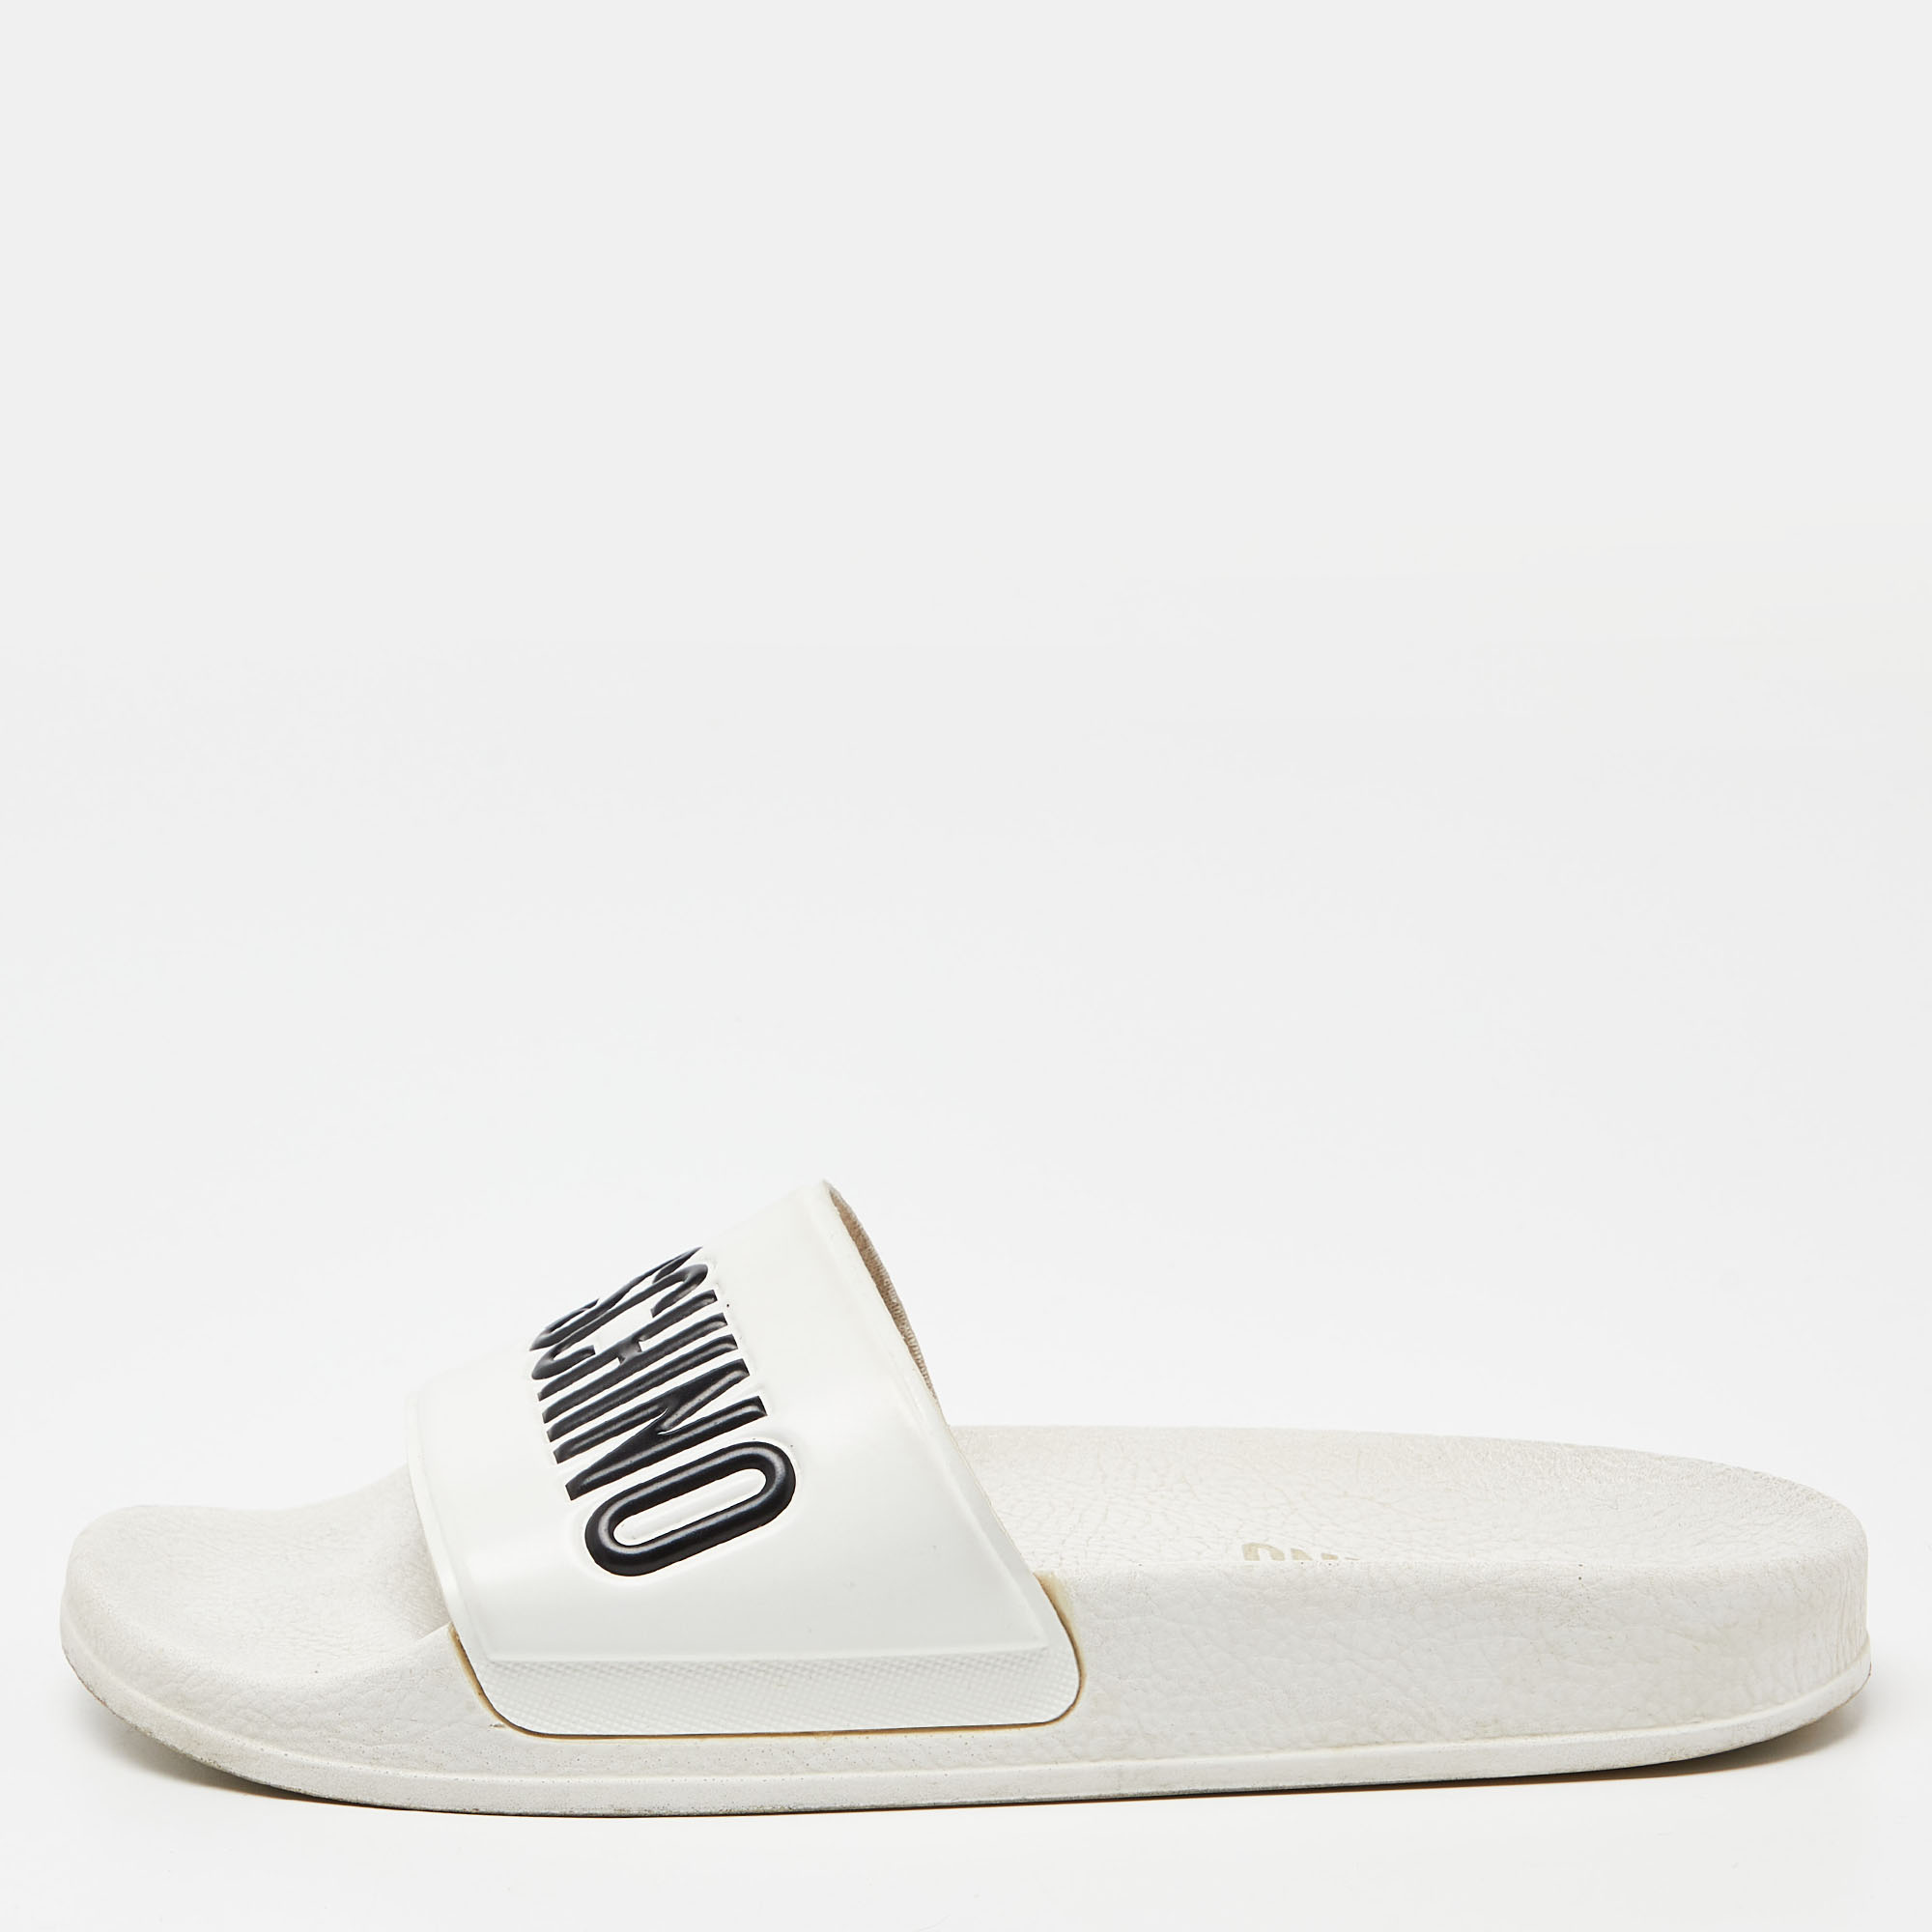 Pre-owned Moschino White Rubber Logo Flat Slides Size 37